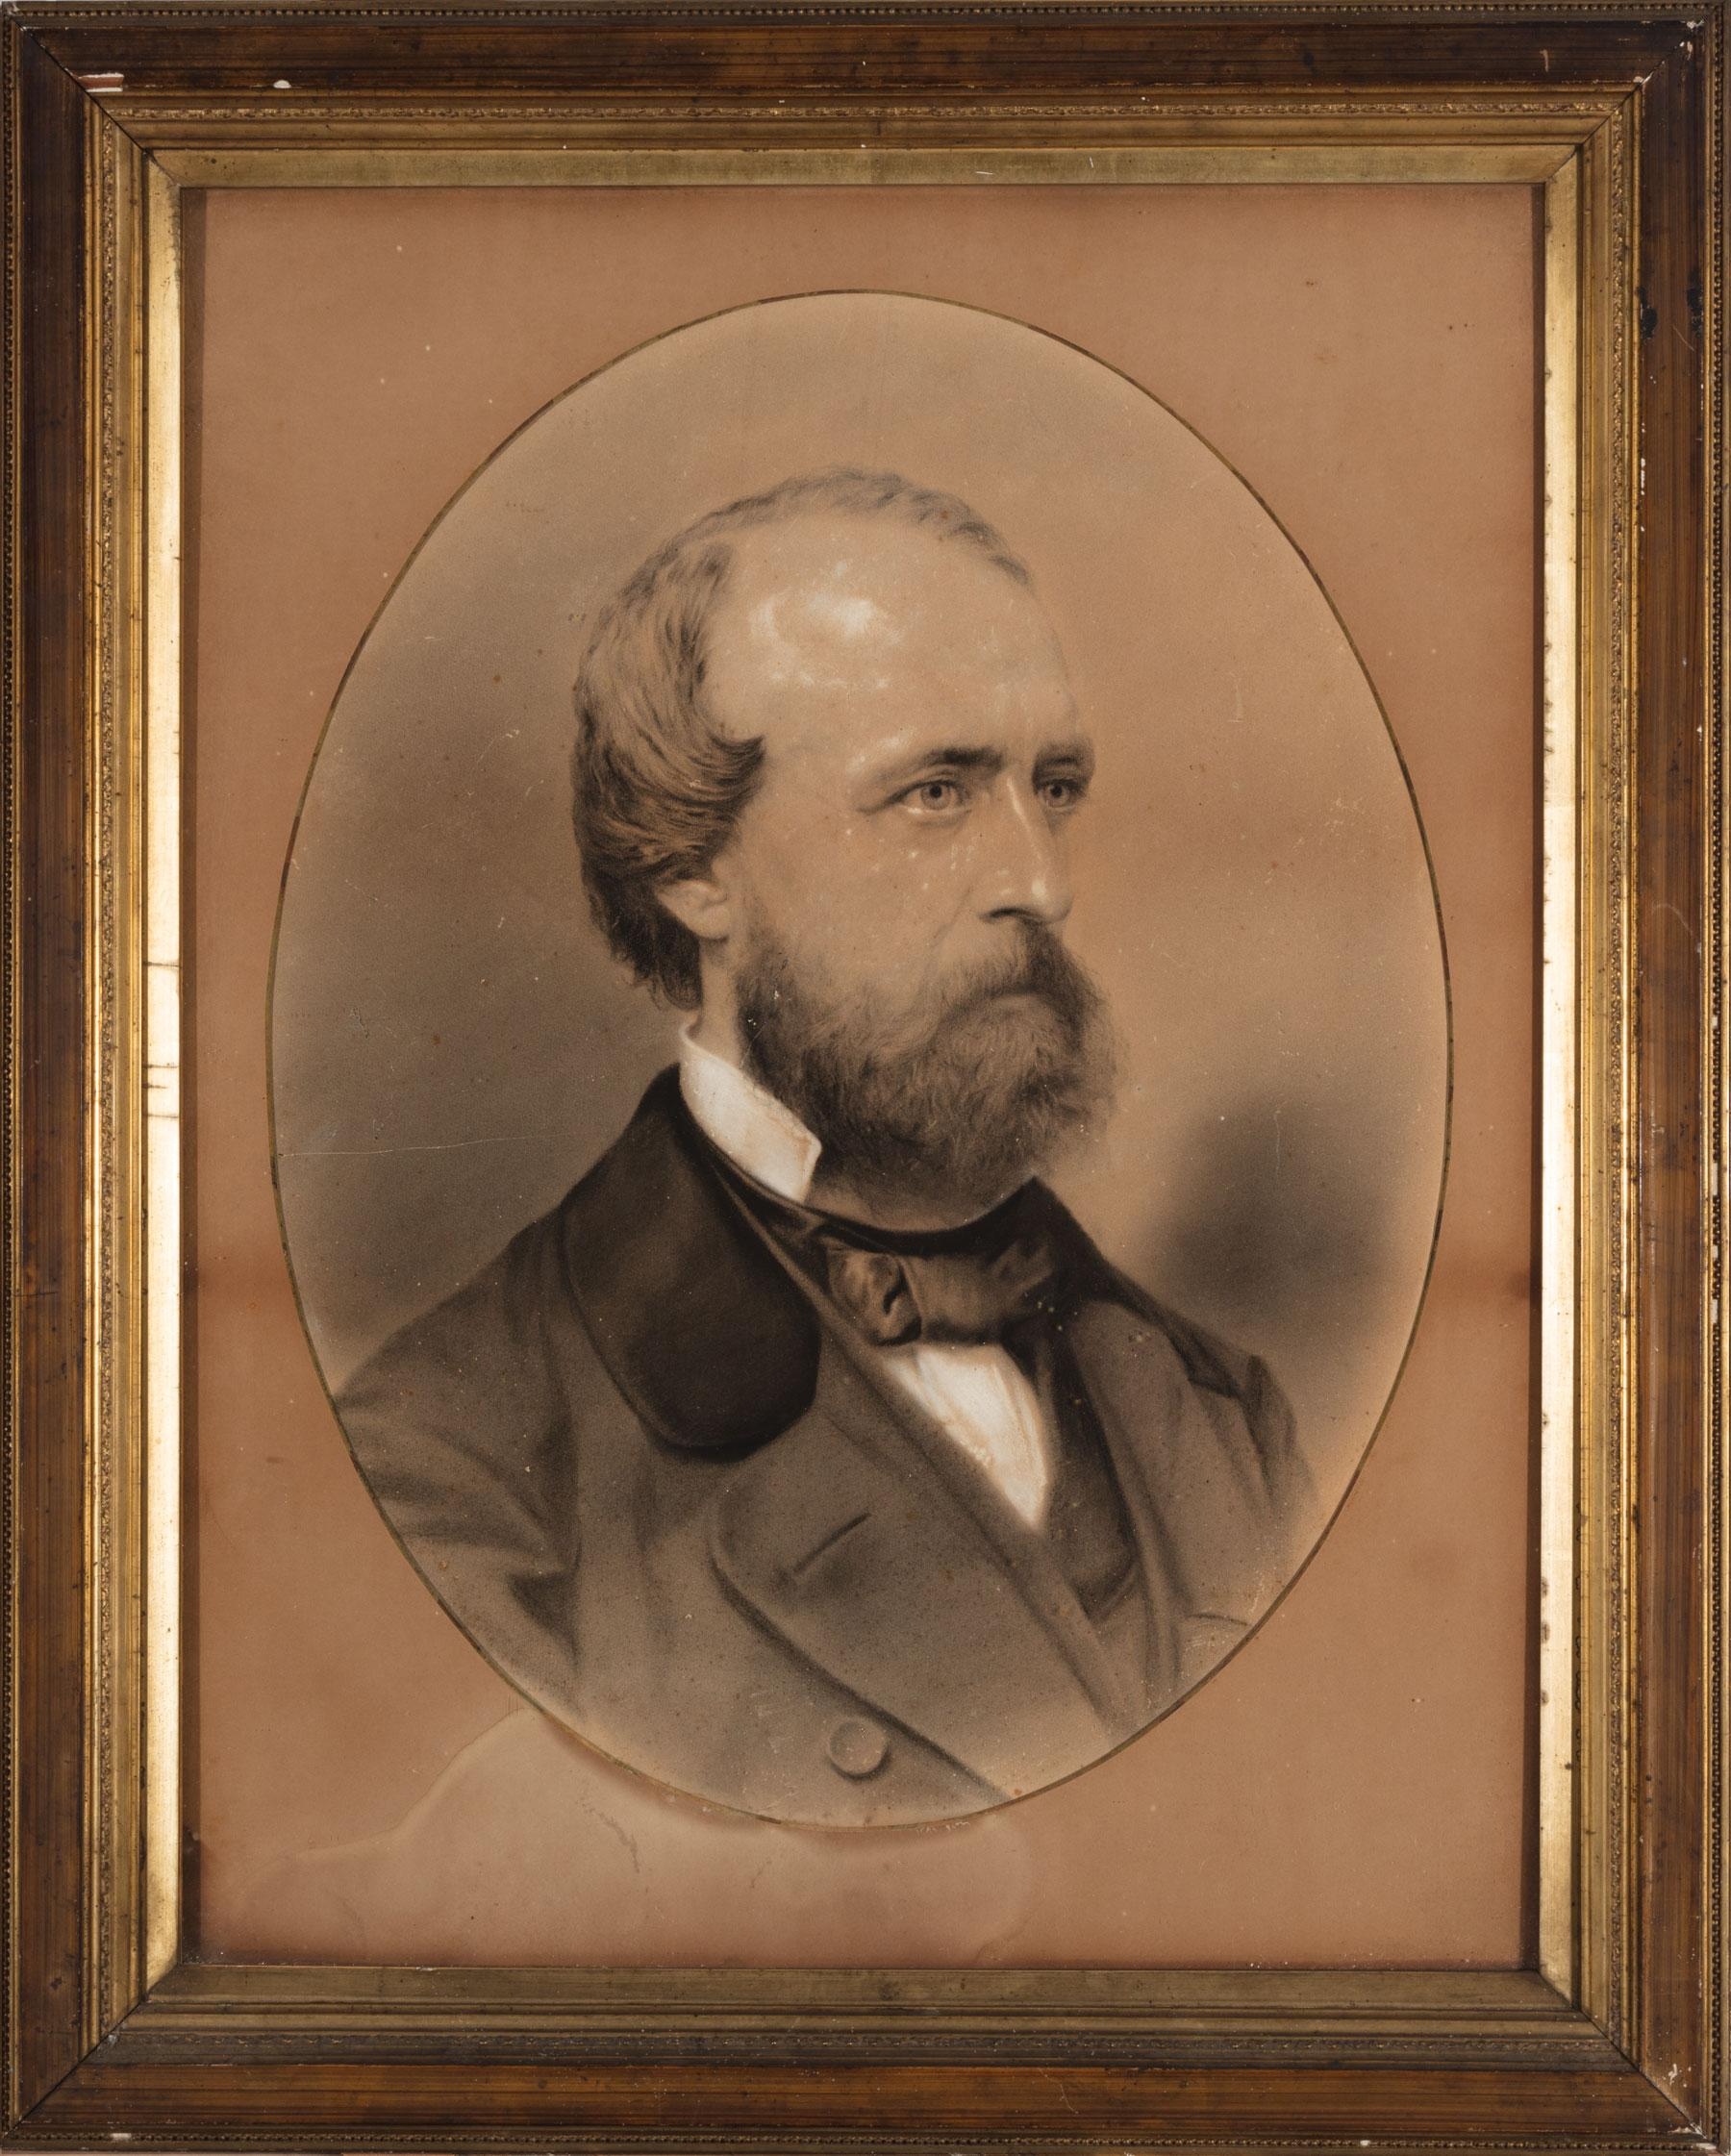 Artwork by Louisiana School, 19th Century, Portrait of James Gallier, Jr. (1827-1868), Made of charcoal and chalk on paper mounted to board